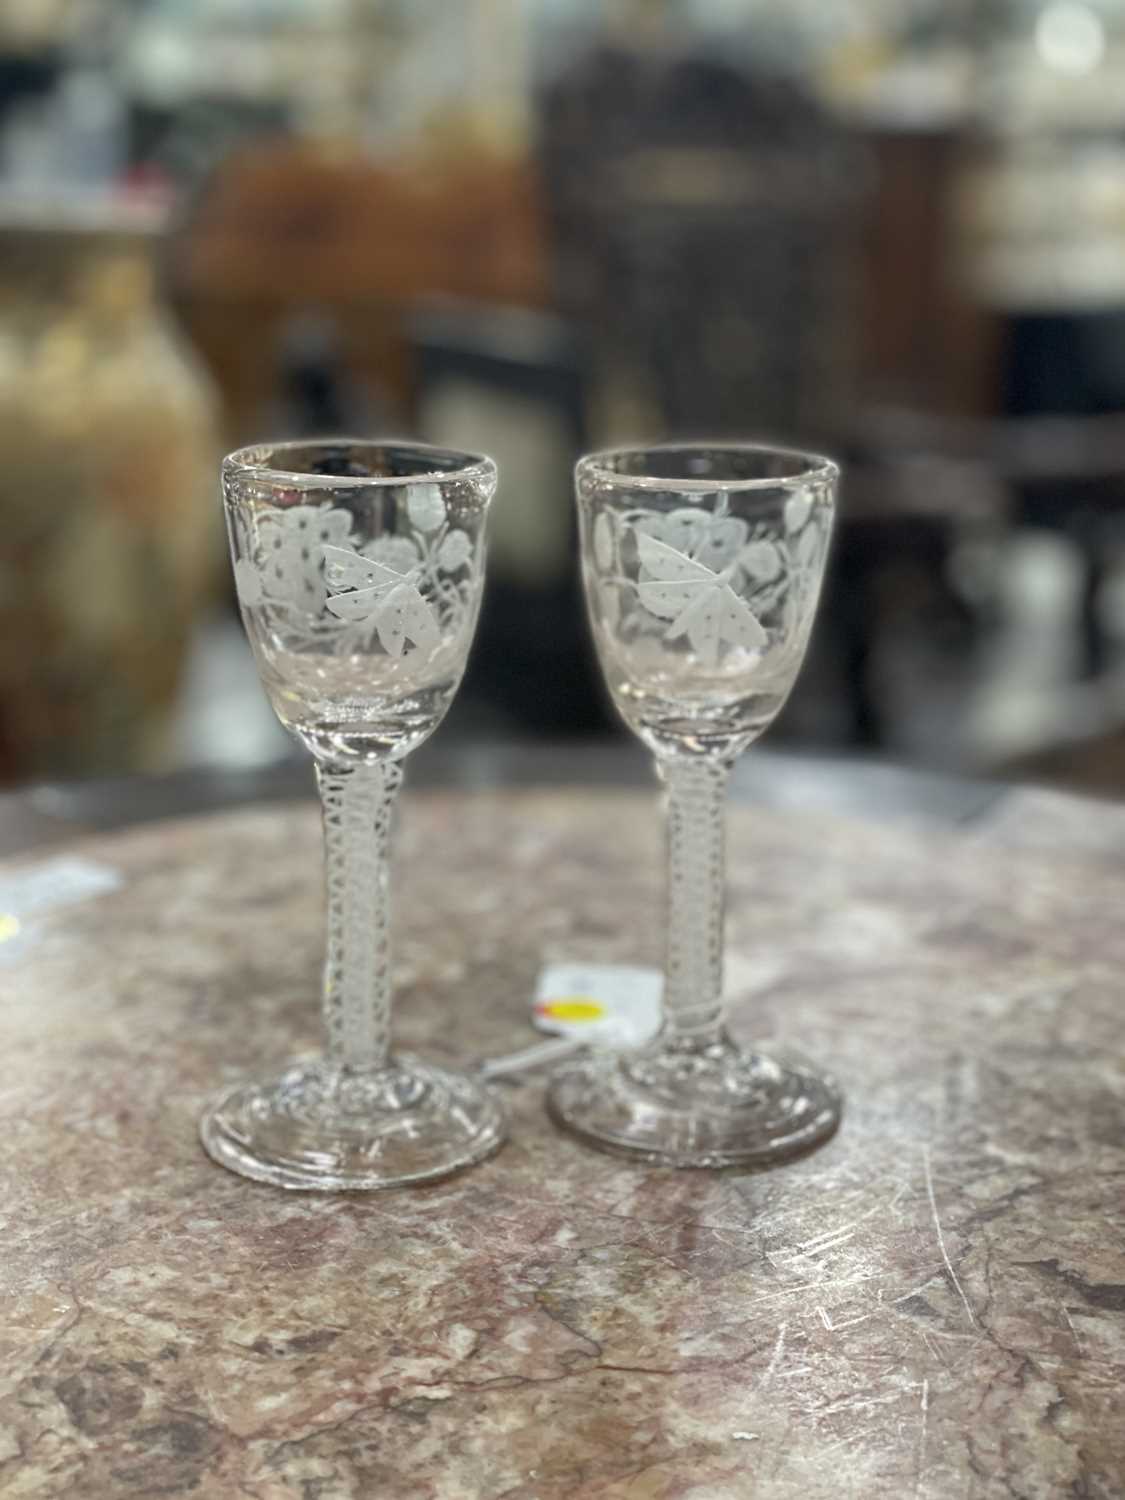 A PAIR OF 18TH CENTURY 'JACOBITE' WINE GLASSES, CIRCA 1770 - Image 3 of 8